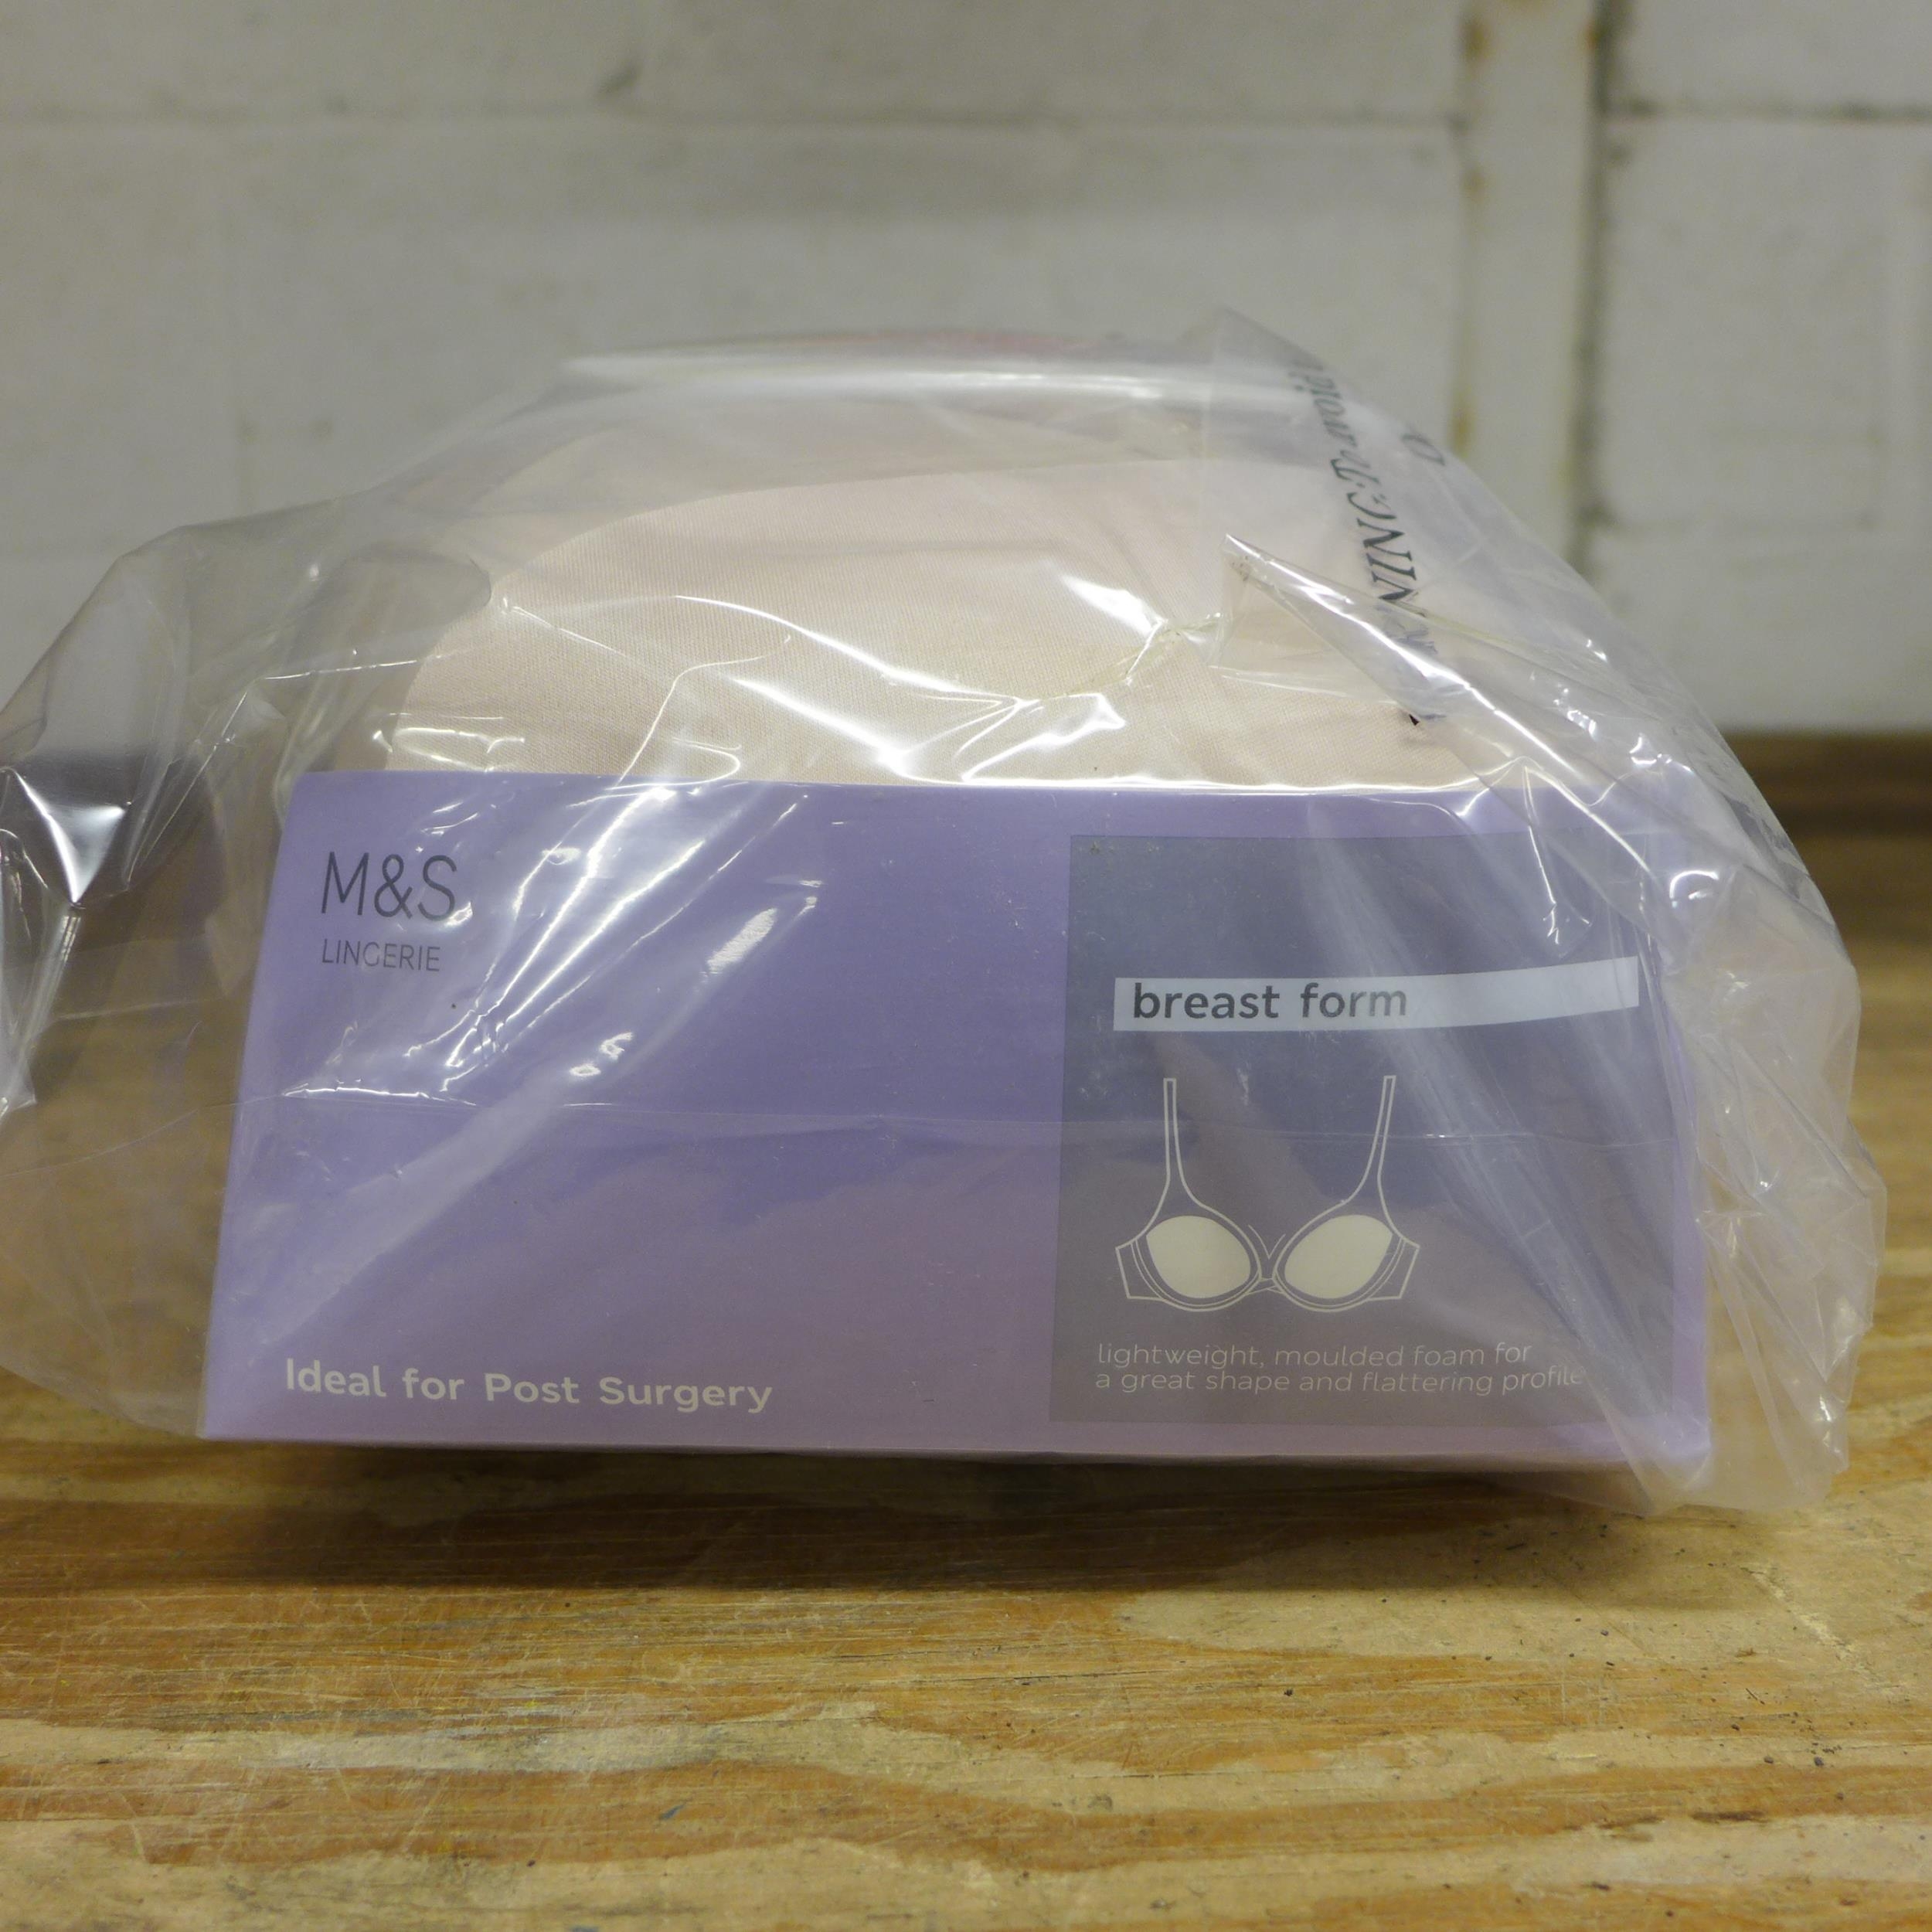 Two boxes of M&S breast form bras - 24 per box